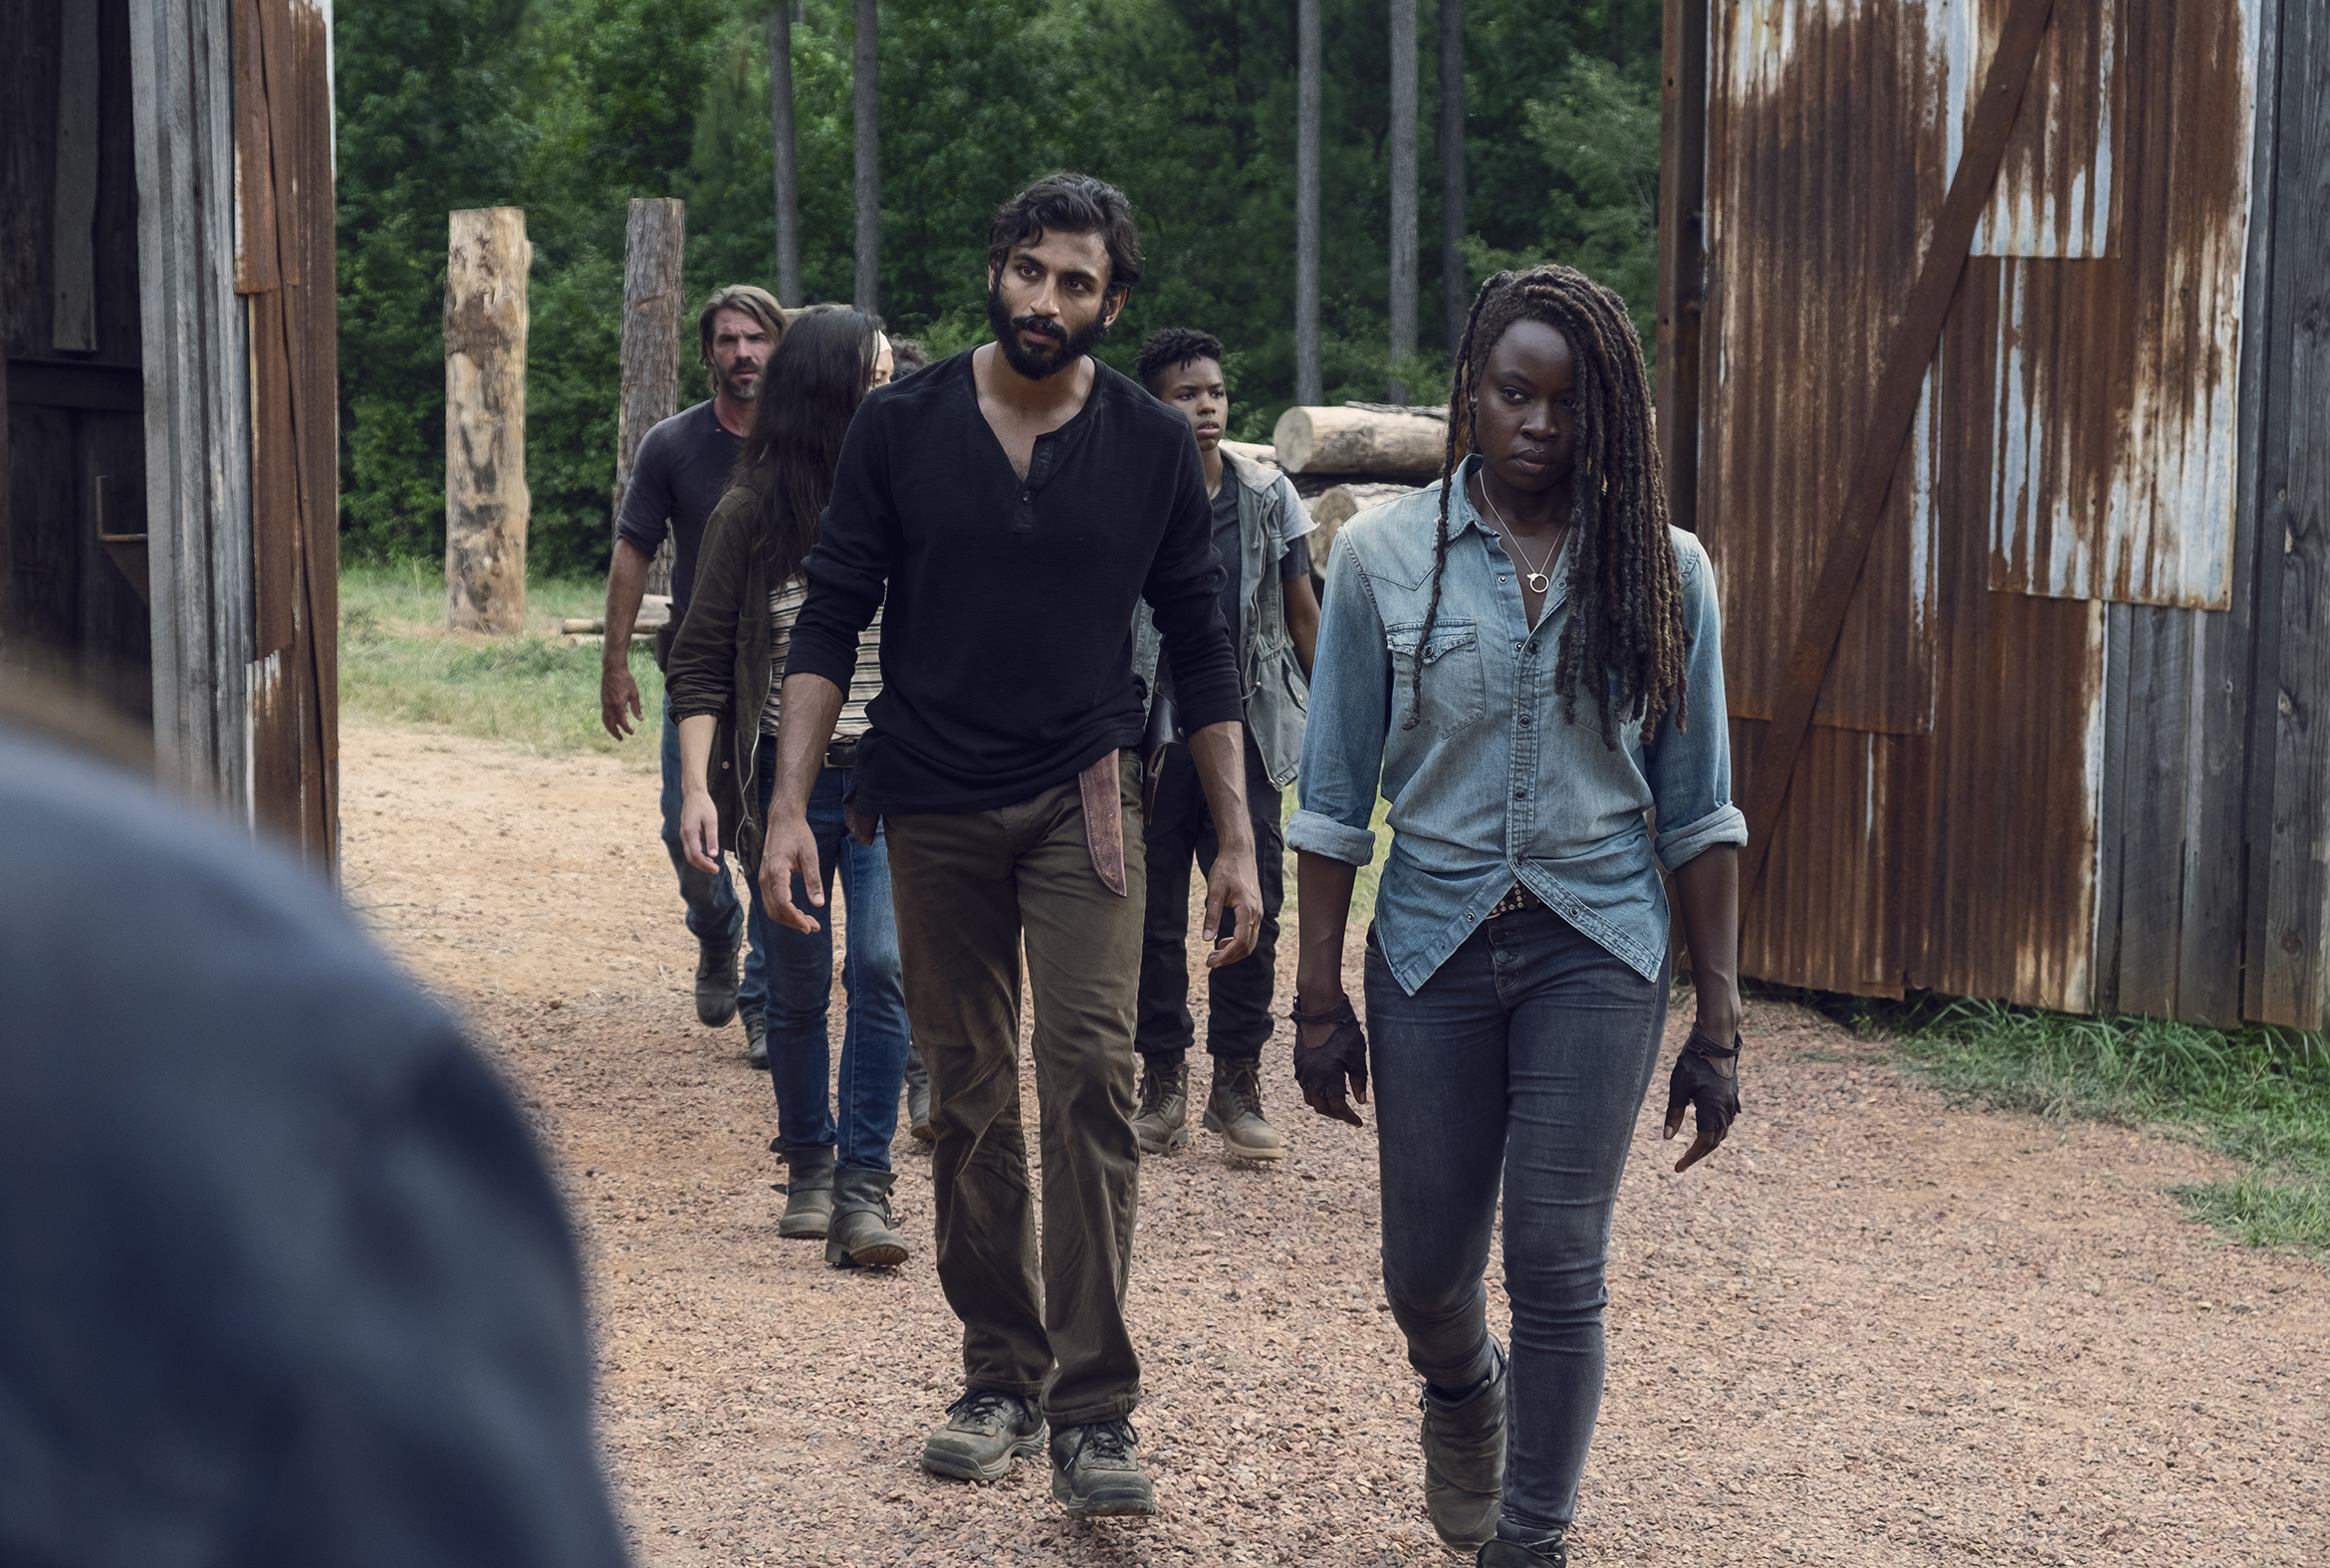 181218-tv-shows-inspire-new-year-resolutions-the-walking-dead.jpg